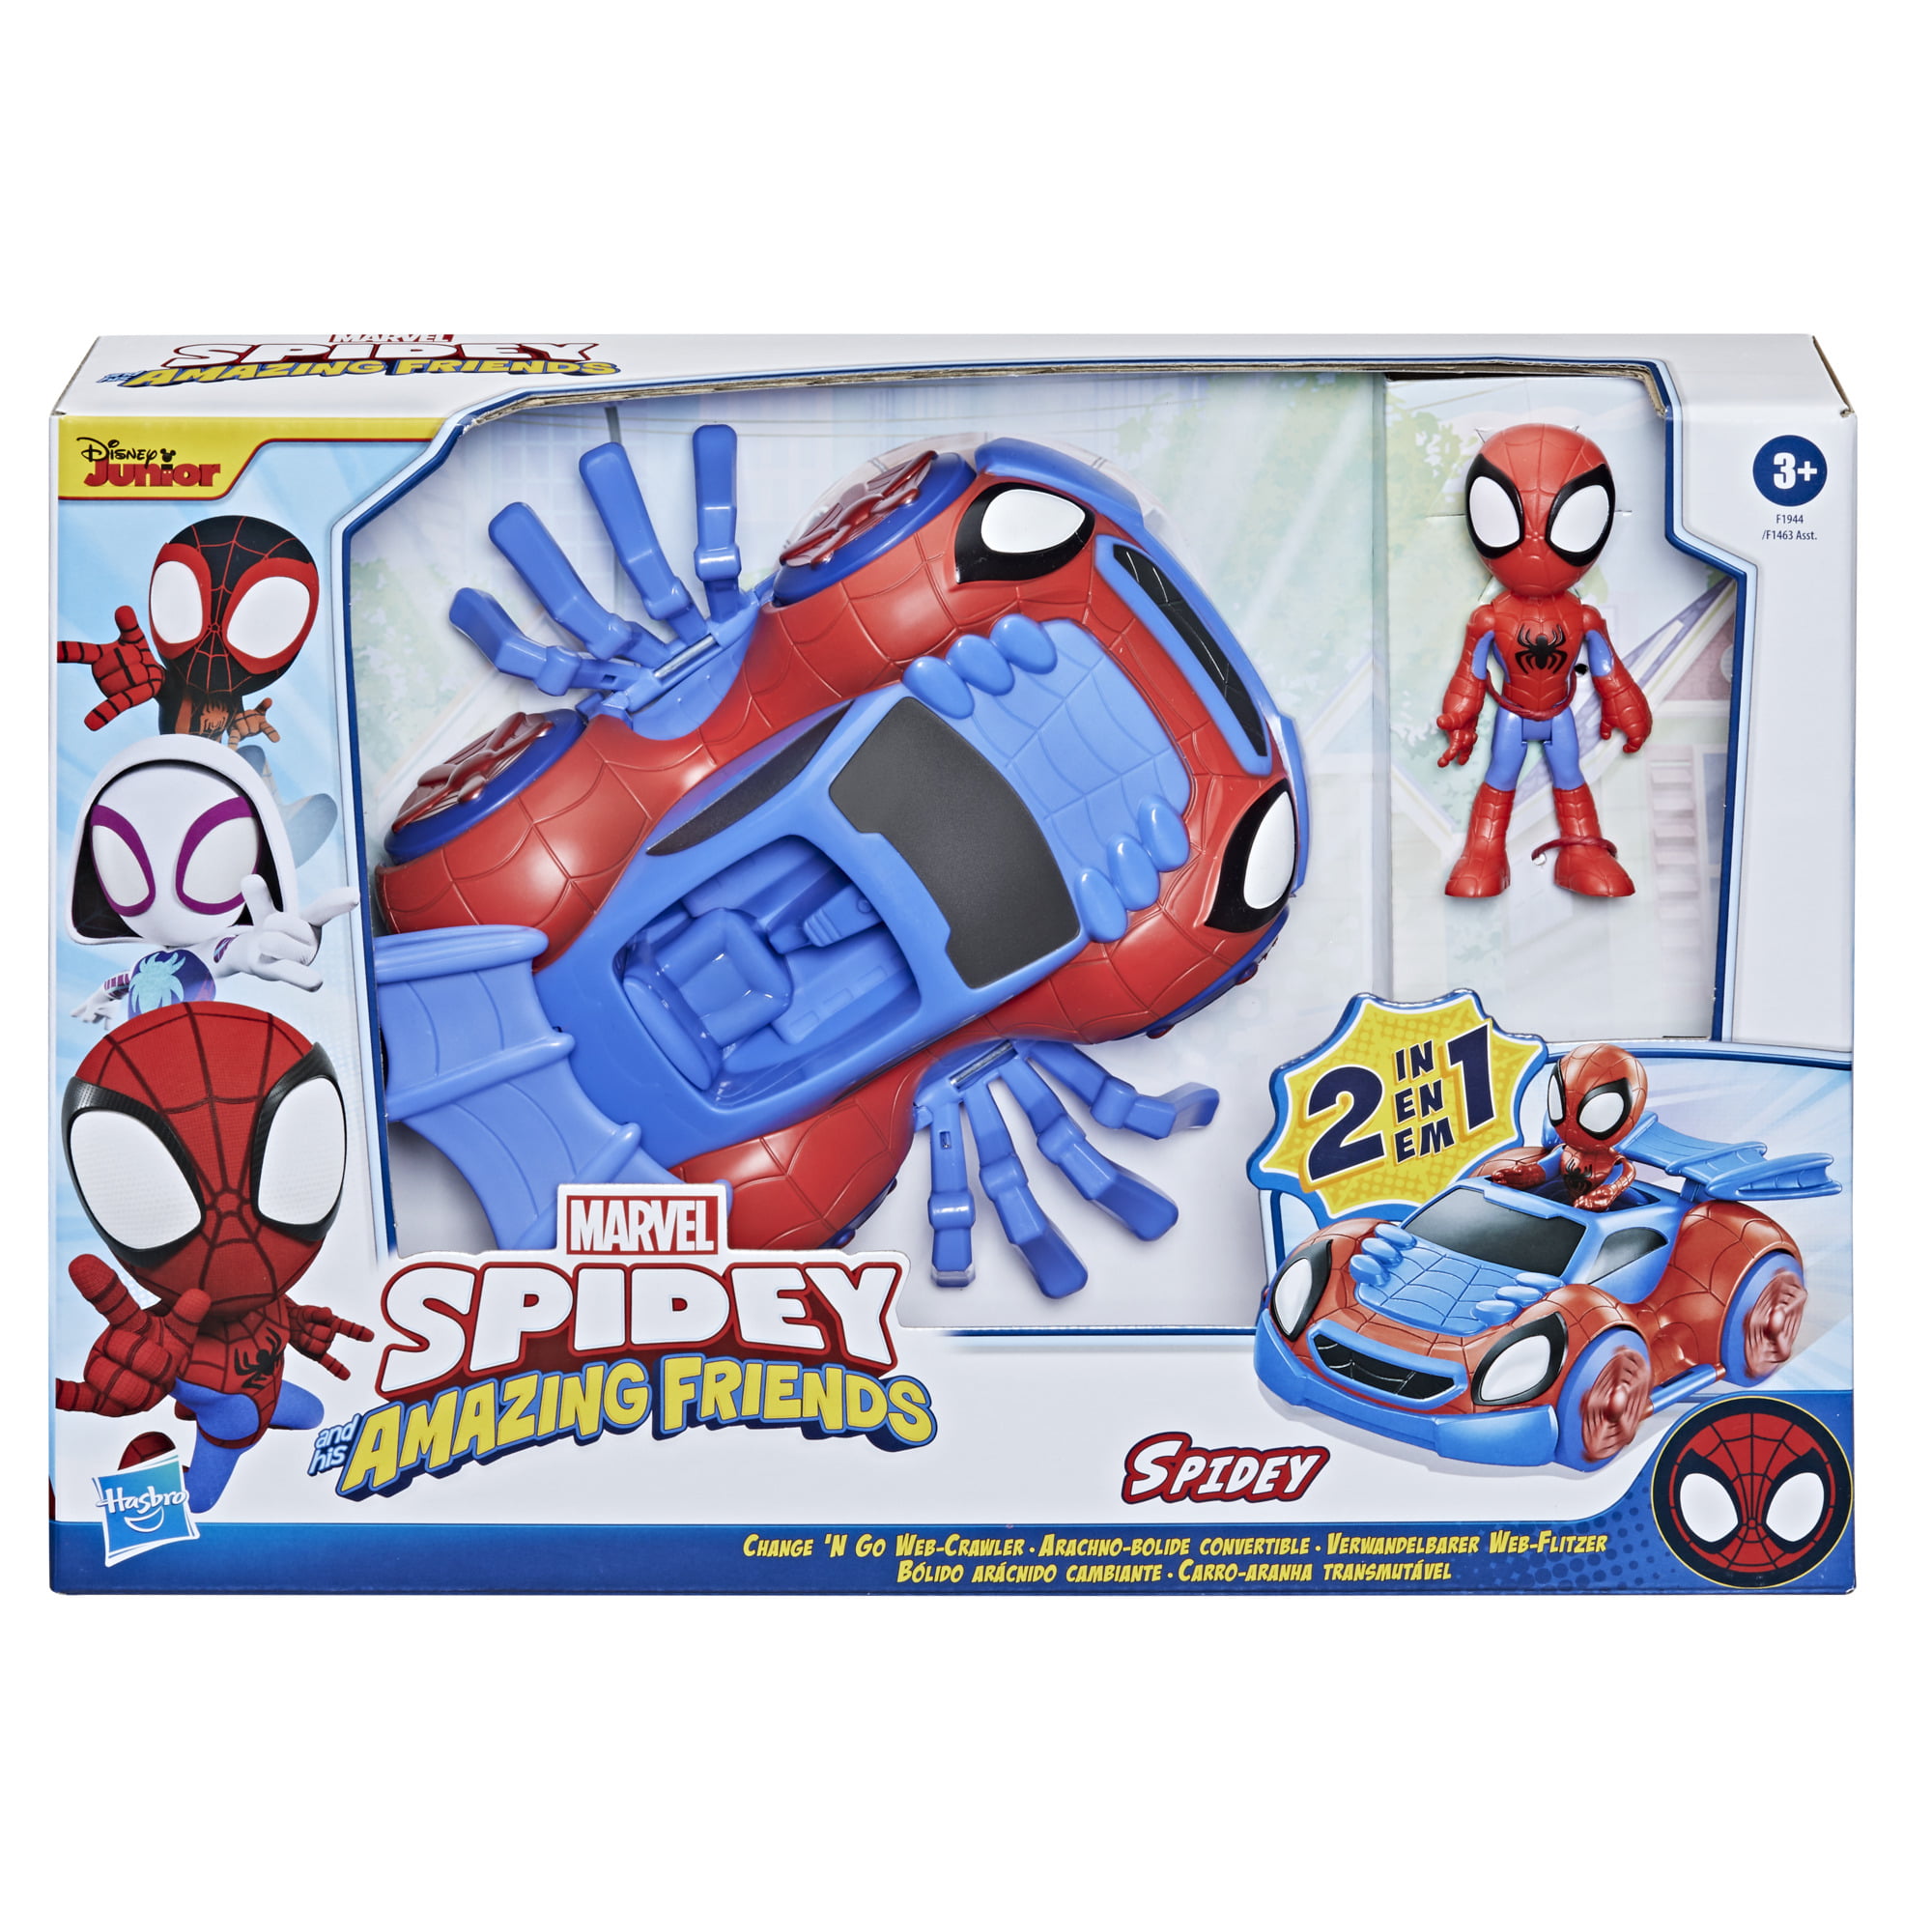 Marvel Spidey and His Amazing Friends Change 'N Go Web-Crawler and Spidey Action Figure Frustration Free Packaging for Kids Ages 3 and Up 4-Inch Figure 2 in 1 Vehicle 